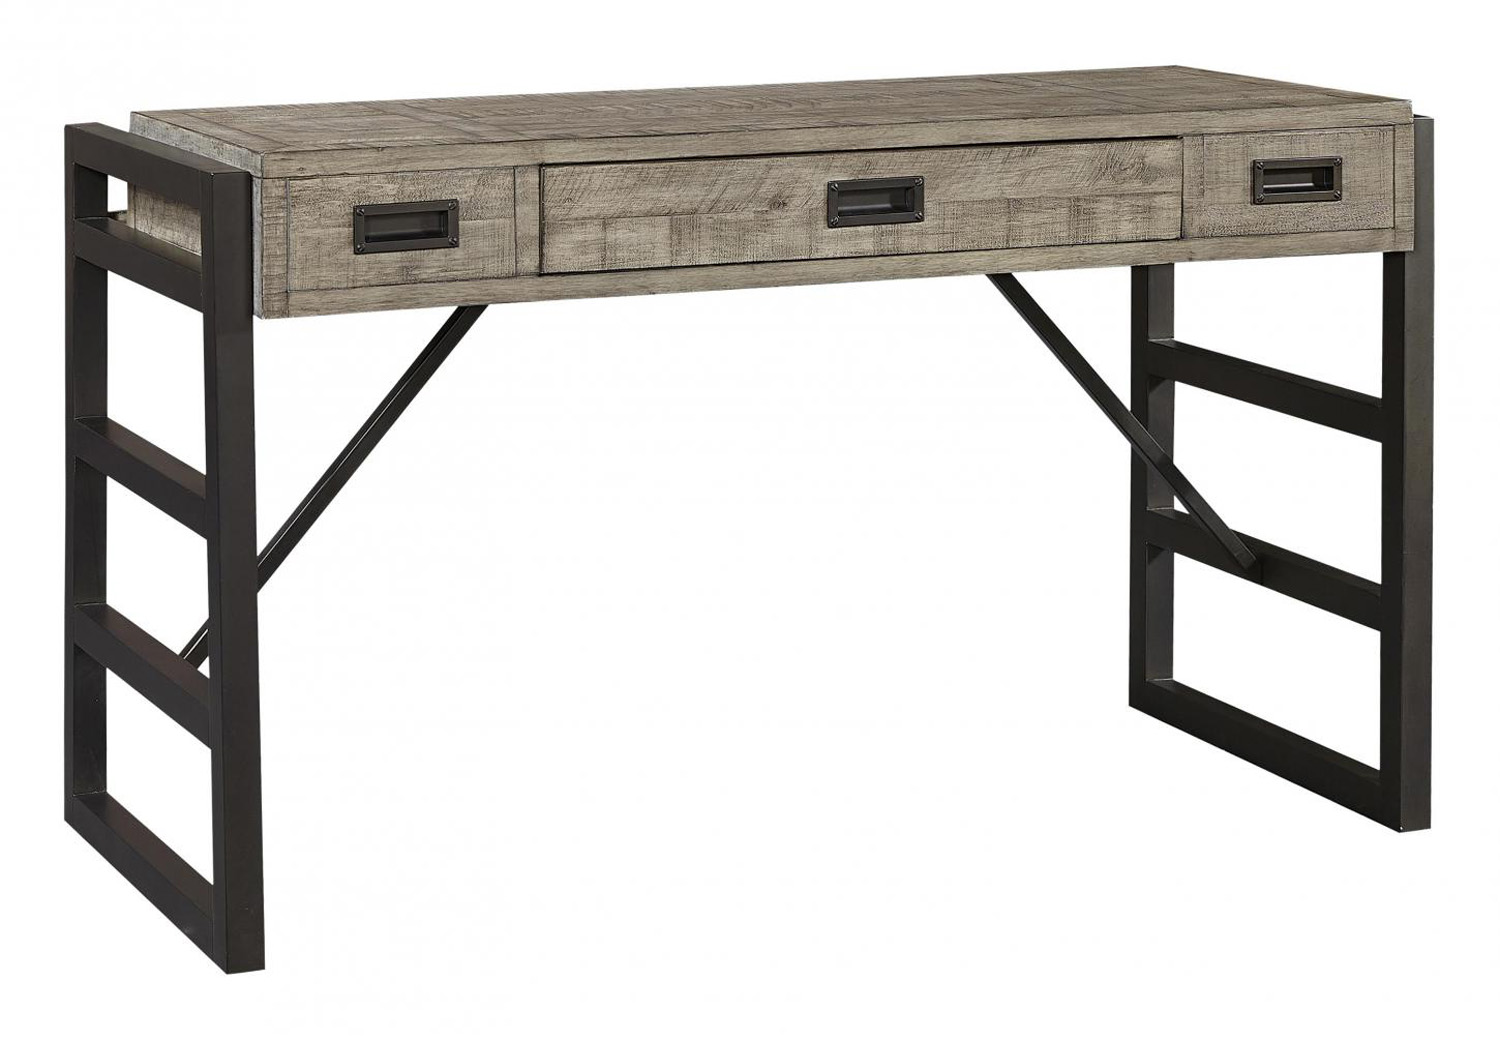 Grayson Liv360 Sofa/Writing Table in the Cinder Grey finish